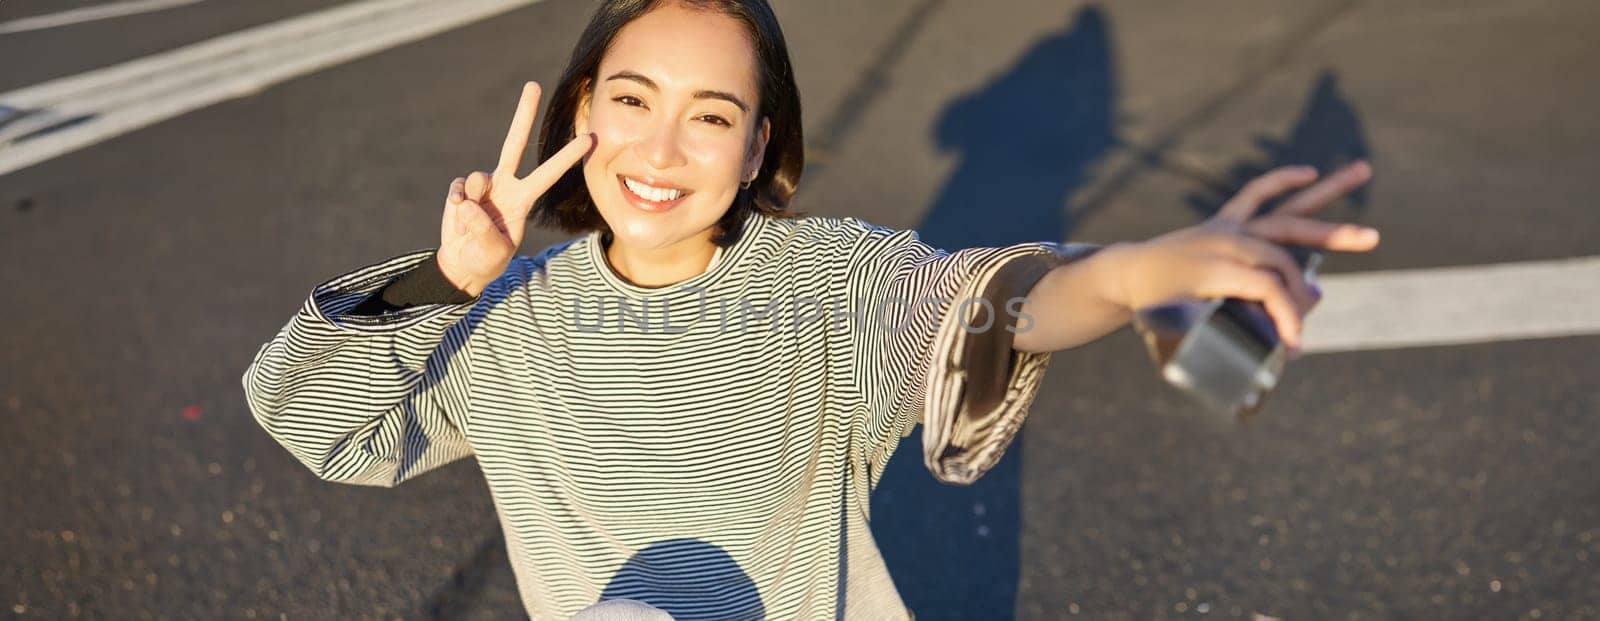 Selfie of asian girl sitting on skateboard, taking photo on smartphone, smiling and showing peace v-sign.